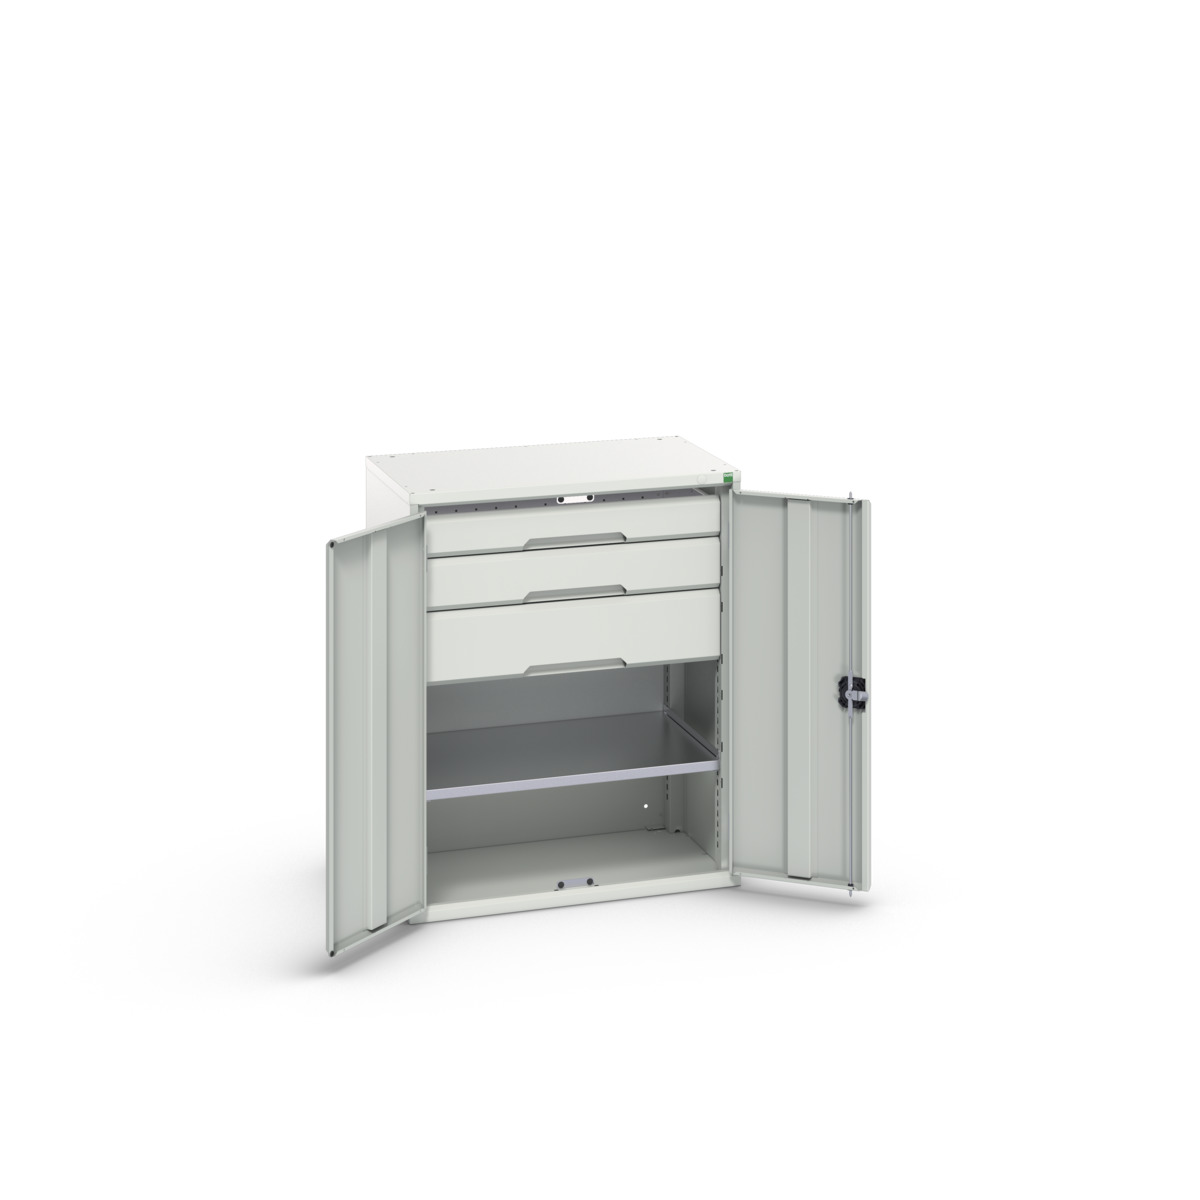 16926454.16 - verso kitted cupboard